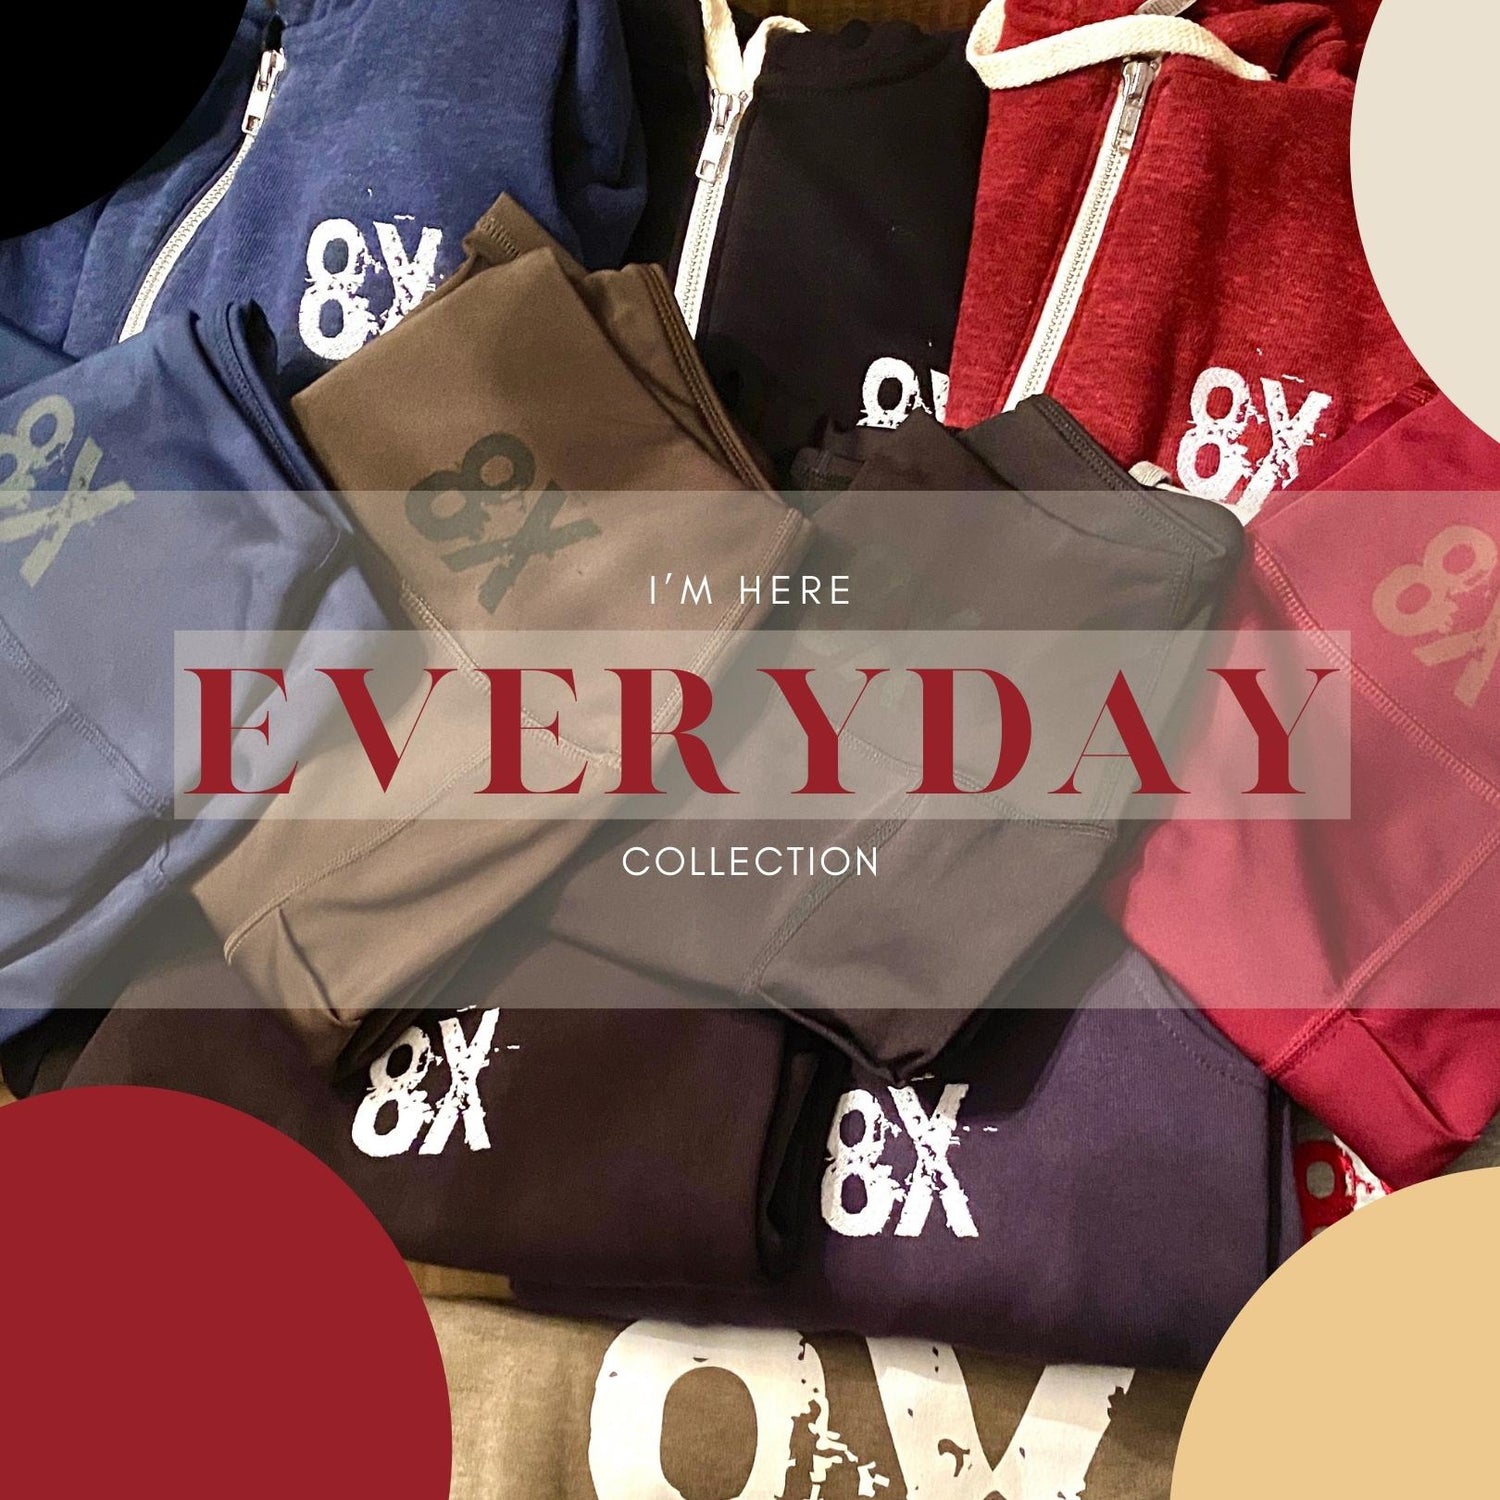 The Everyday Collection